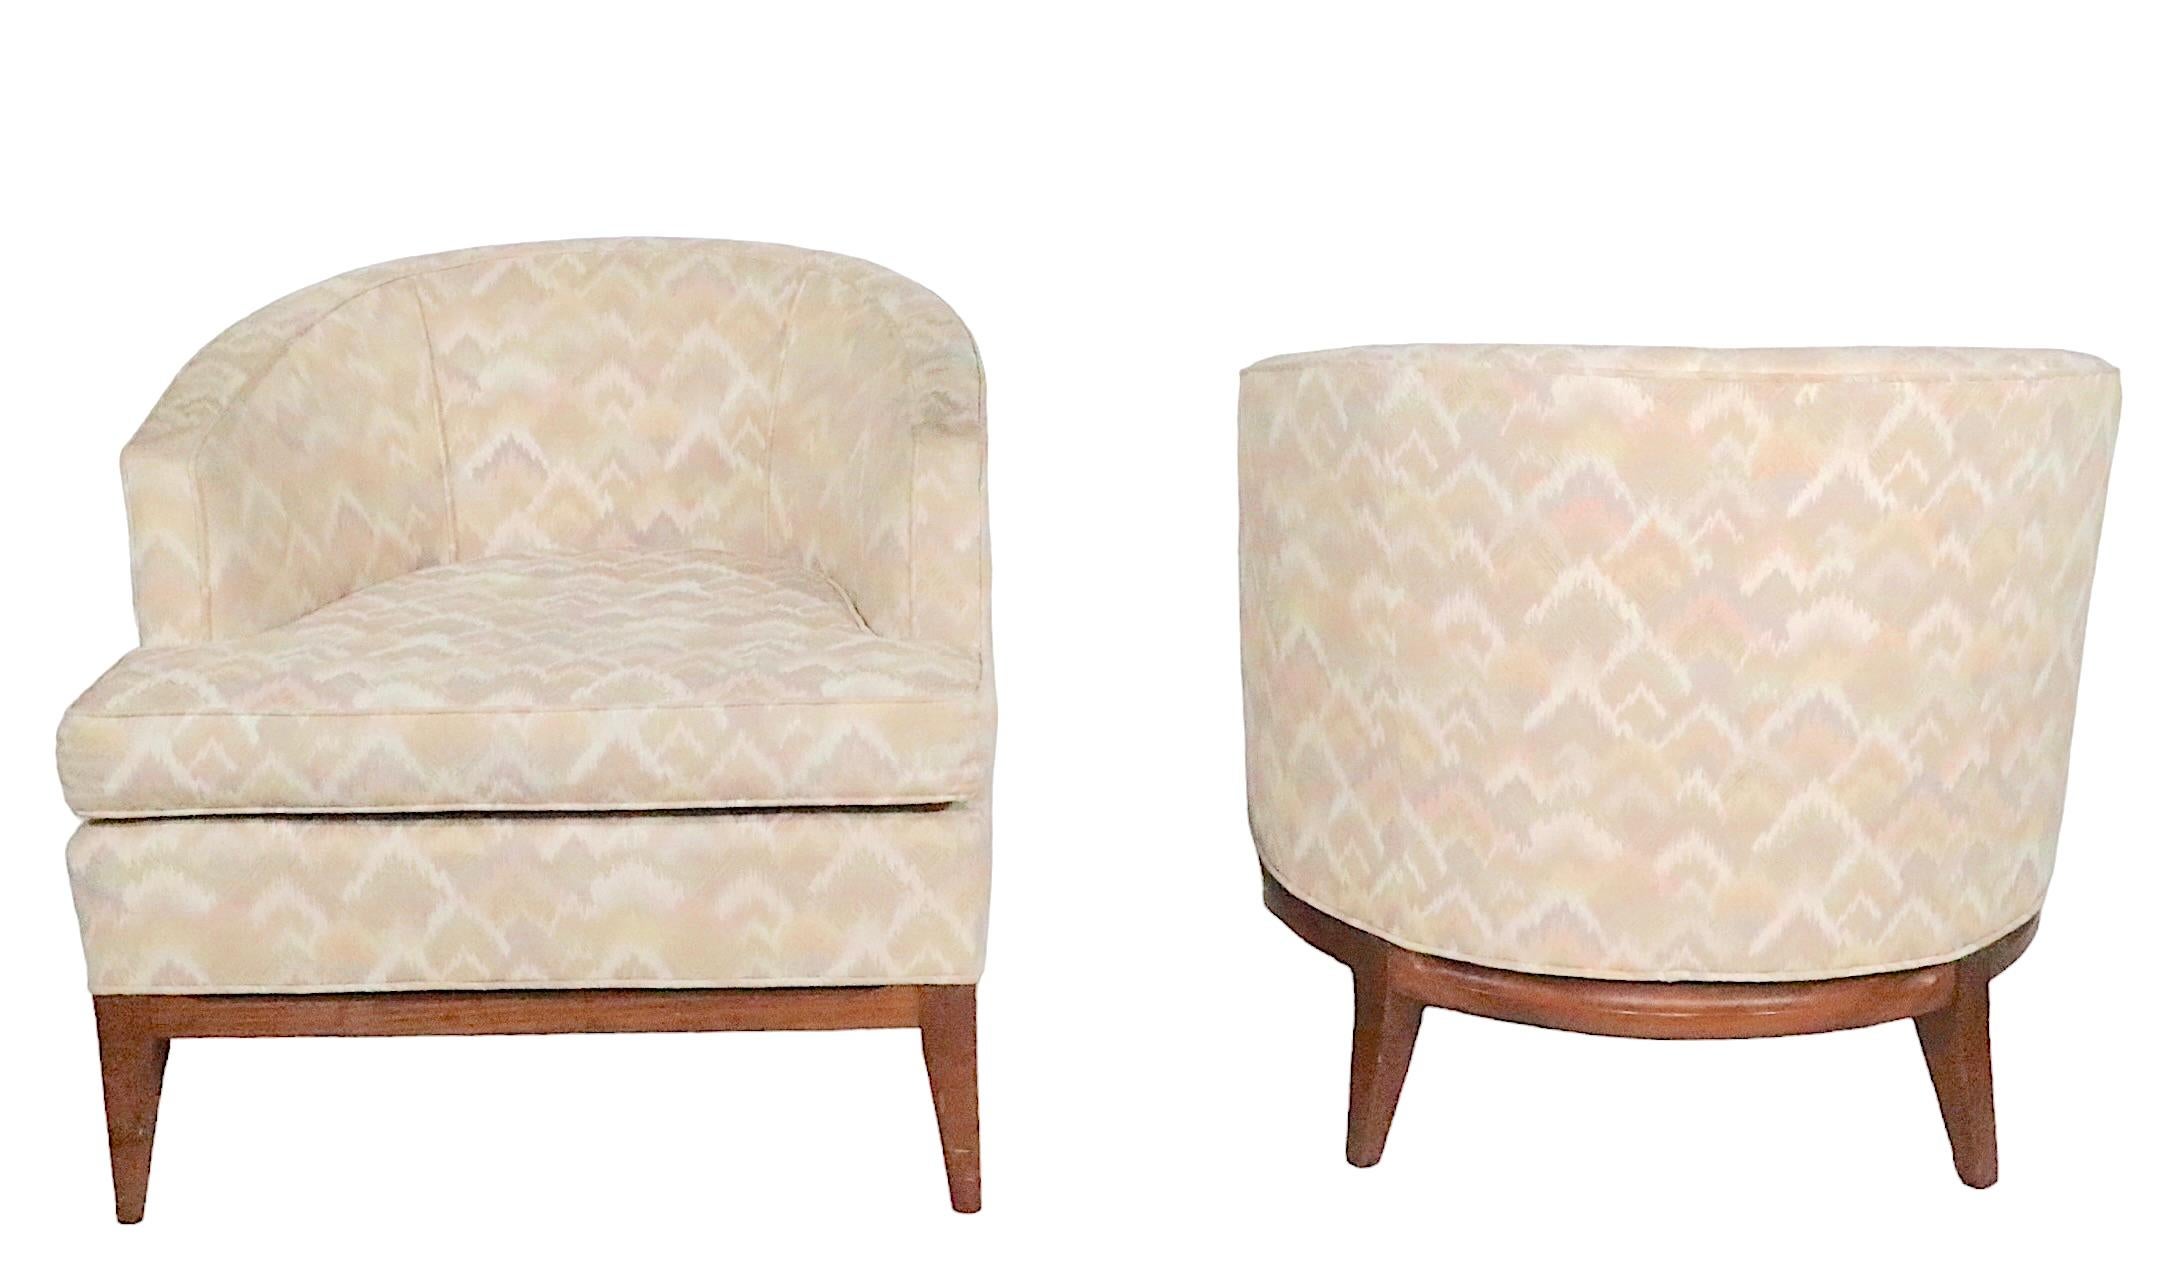 Pair. Mid Century Tub Chairs After Robsjohn Gibbings, circa 1950 - 1960s For Sale 2